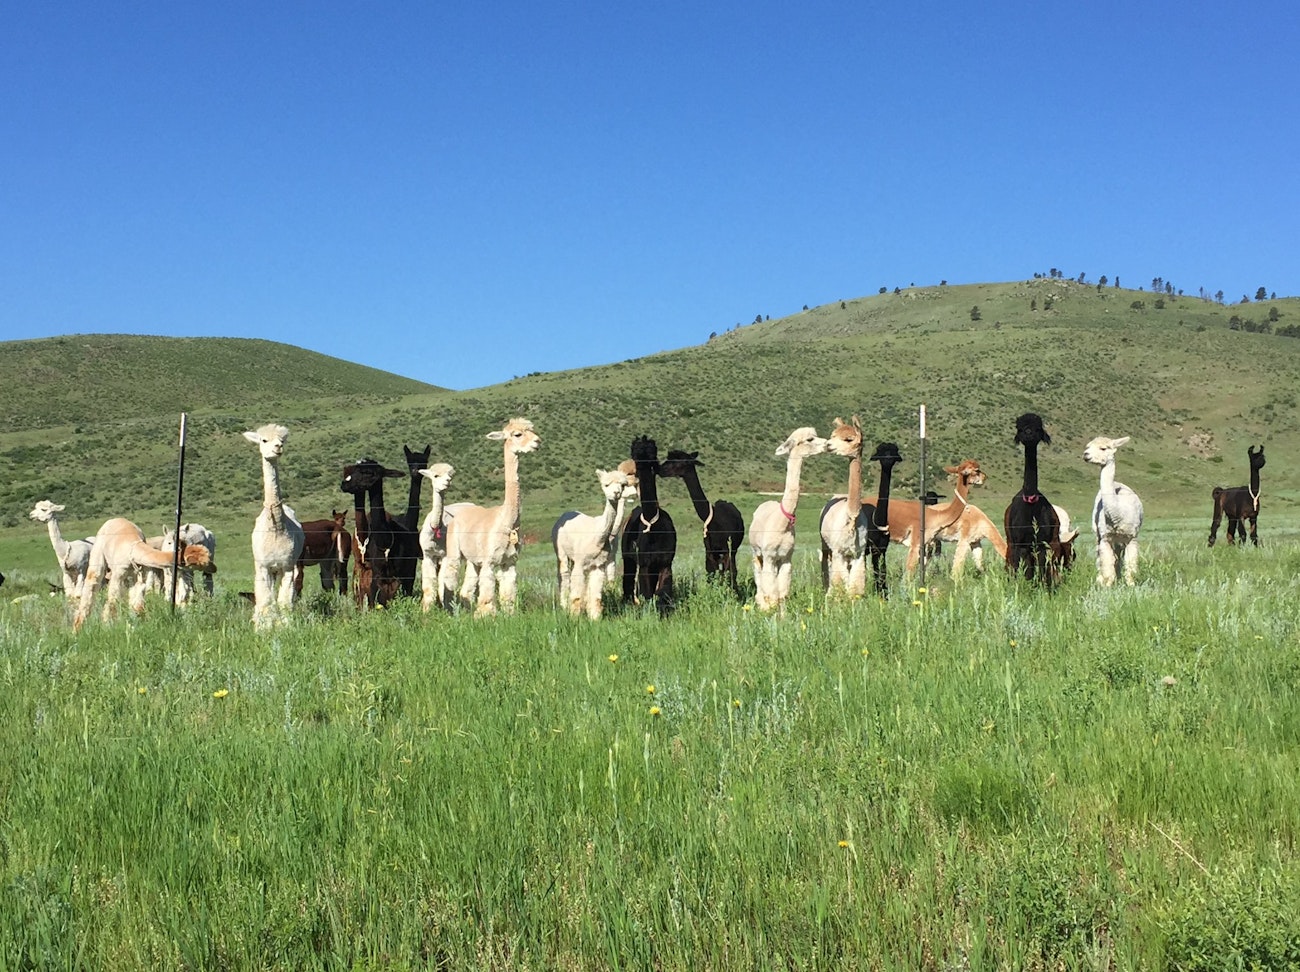 A heard of alpacas in a grass field with foothills in the background. Photo used with permission from Denise Haines